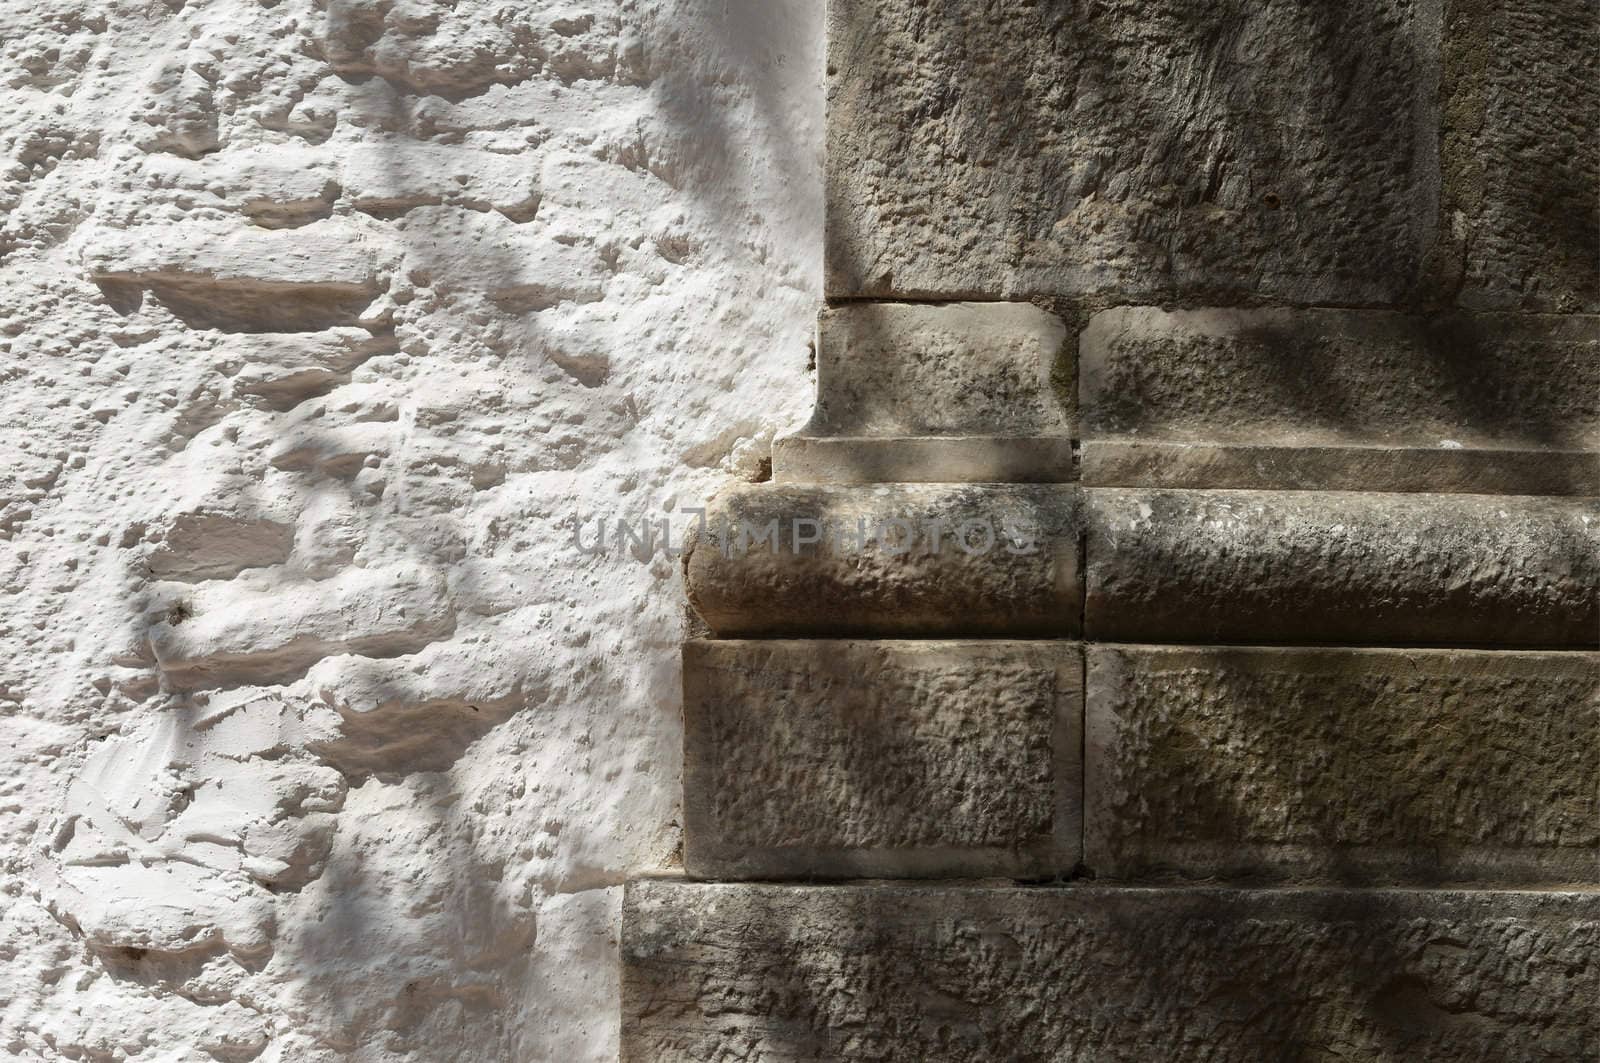 Whitewashed wall and stone architectural detail, Portugal